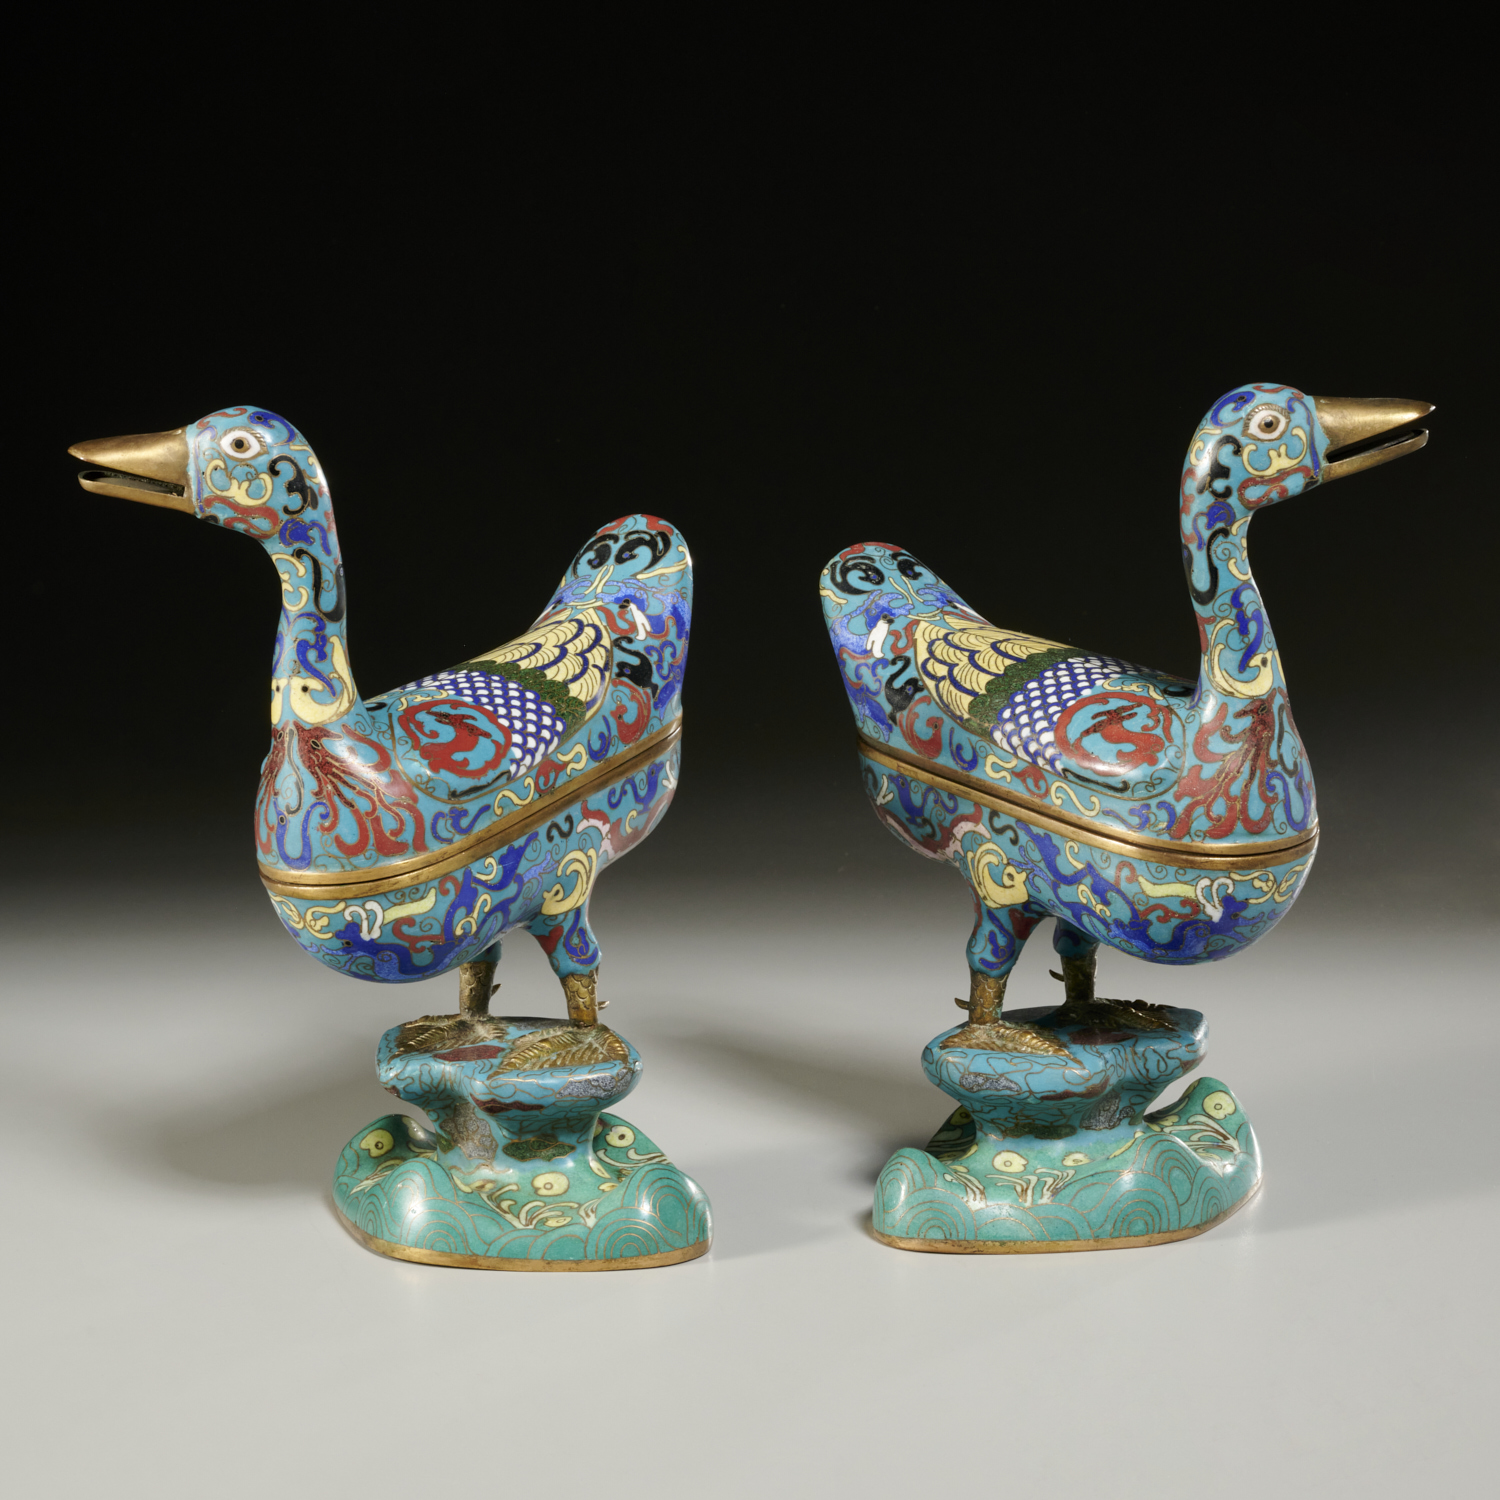 PAIR CHINESE CLOISONNE DUCK-FORM